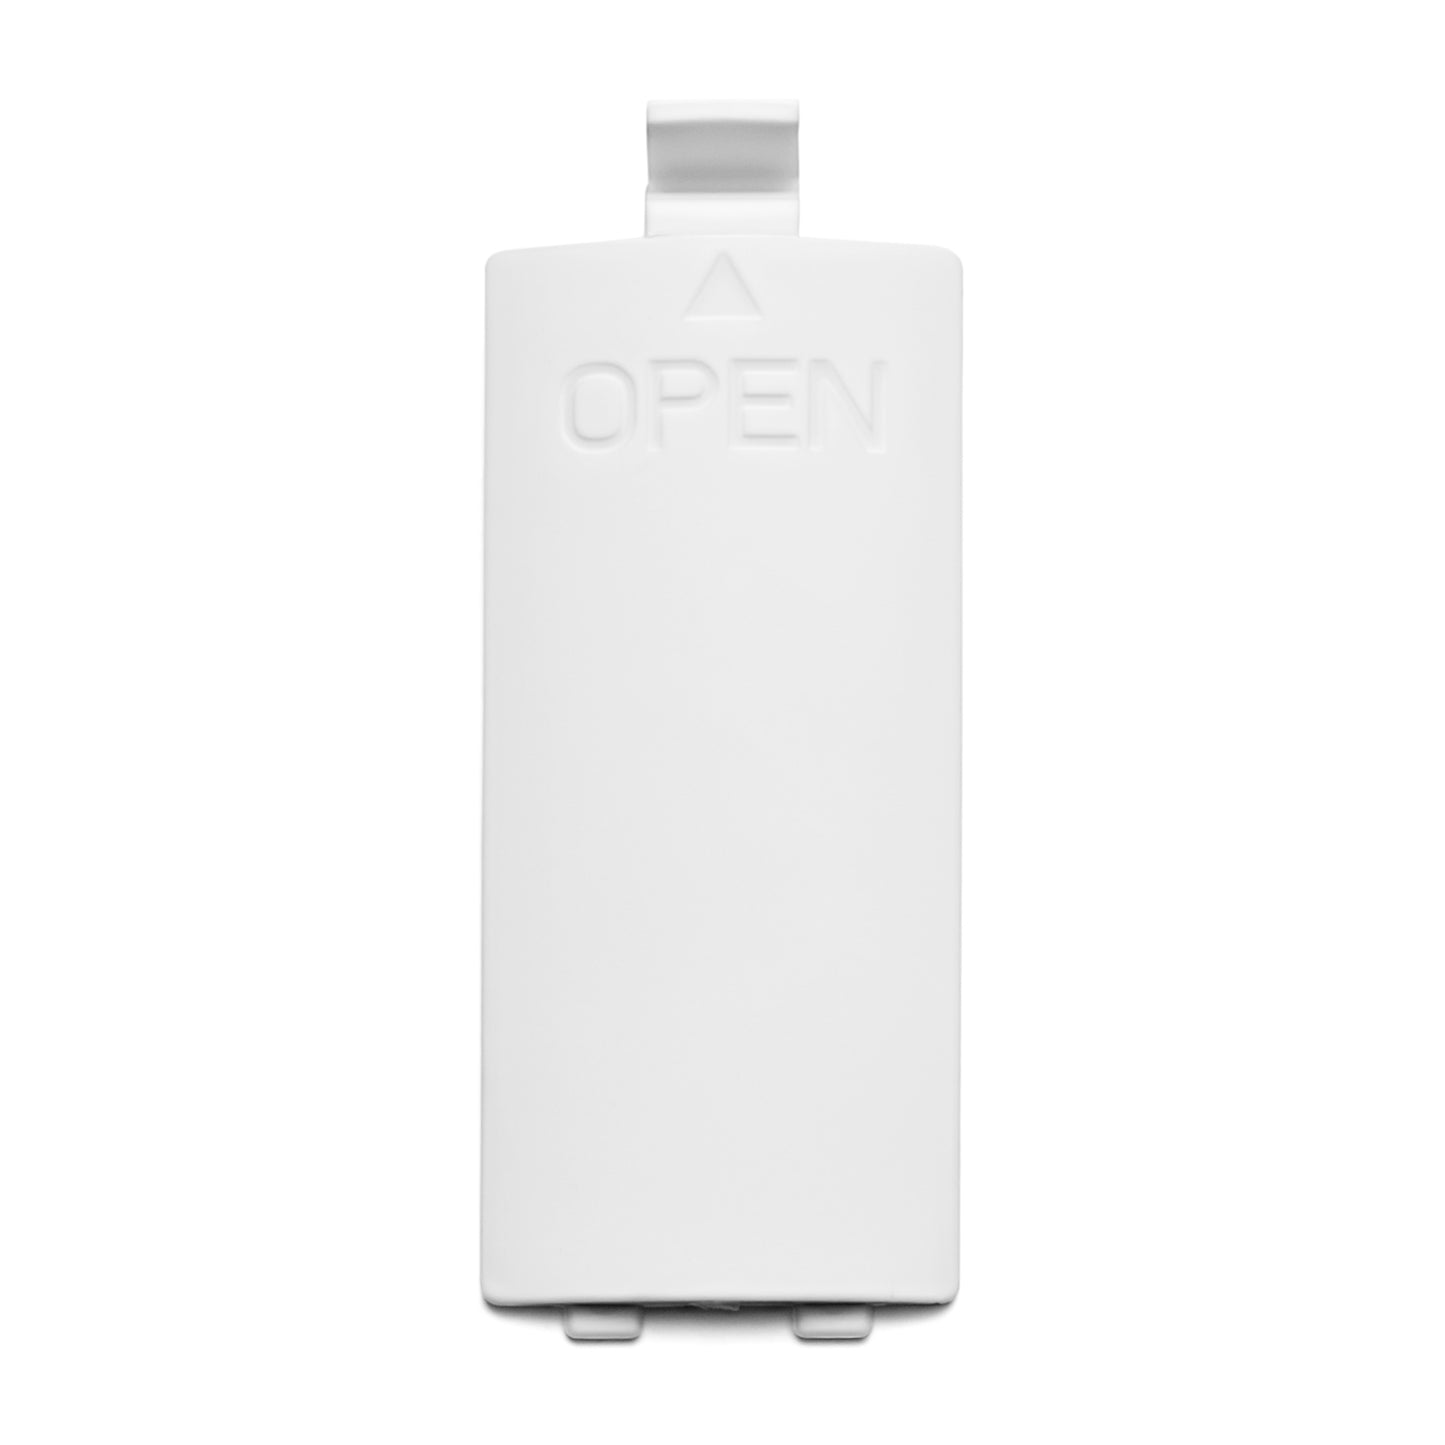 GS24-Battery Cover